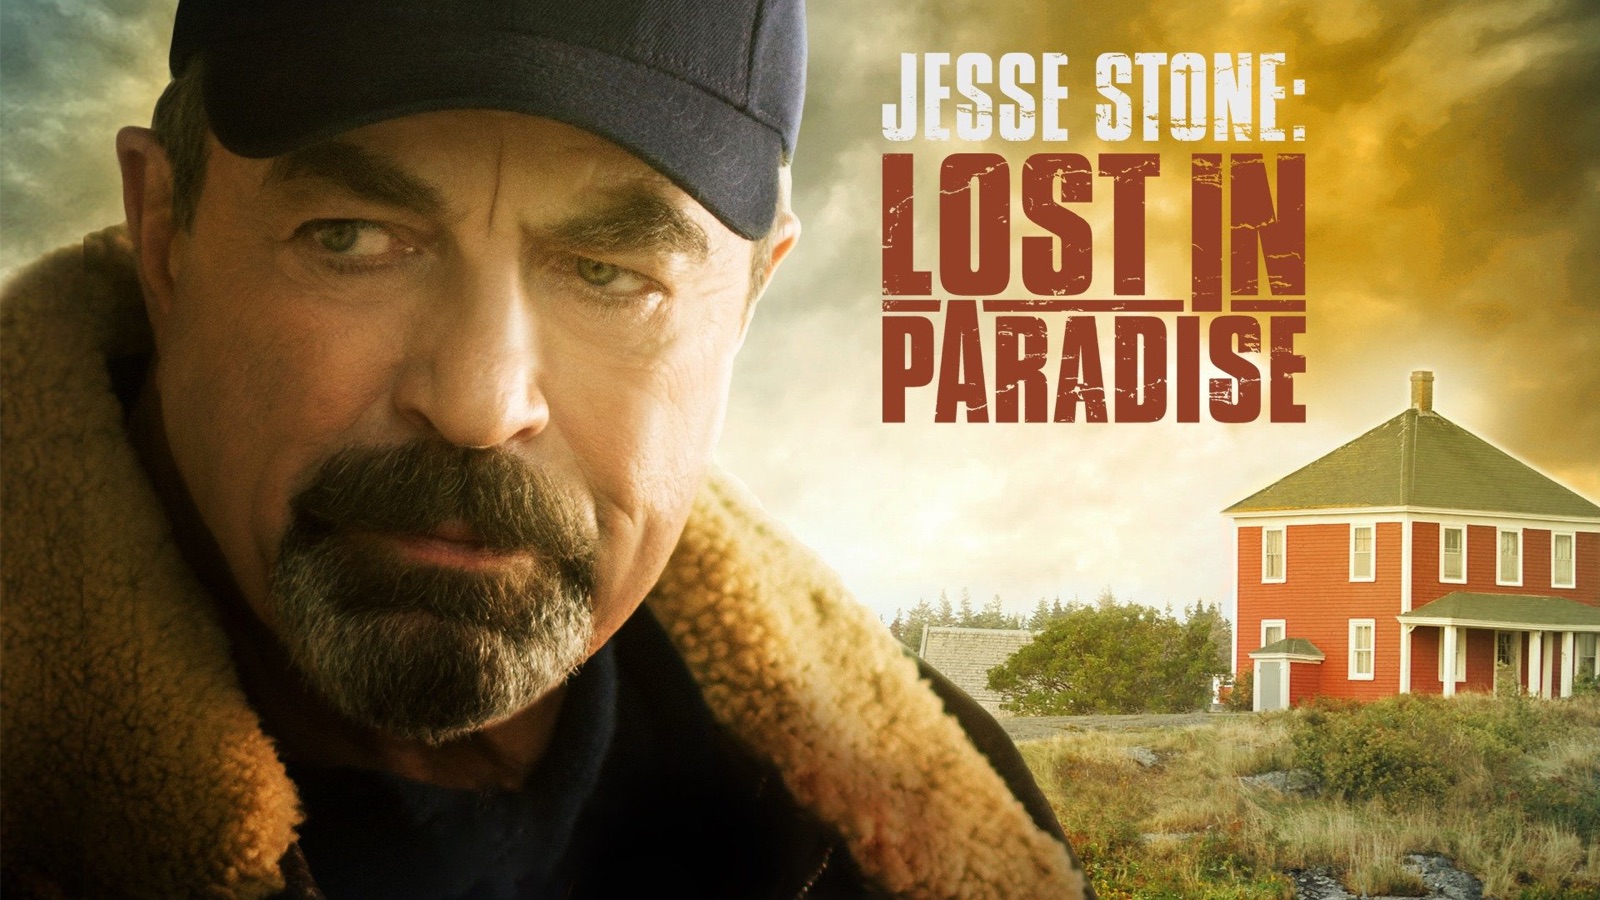 Jesse Stone: Lost in Paradise on Apple TV